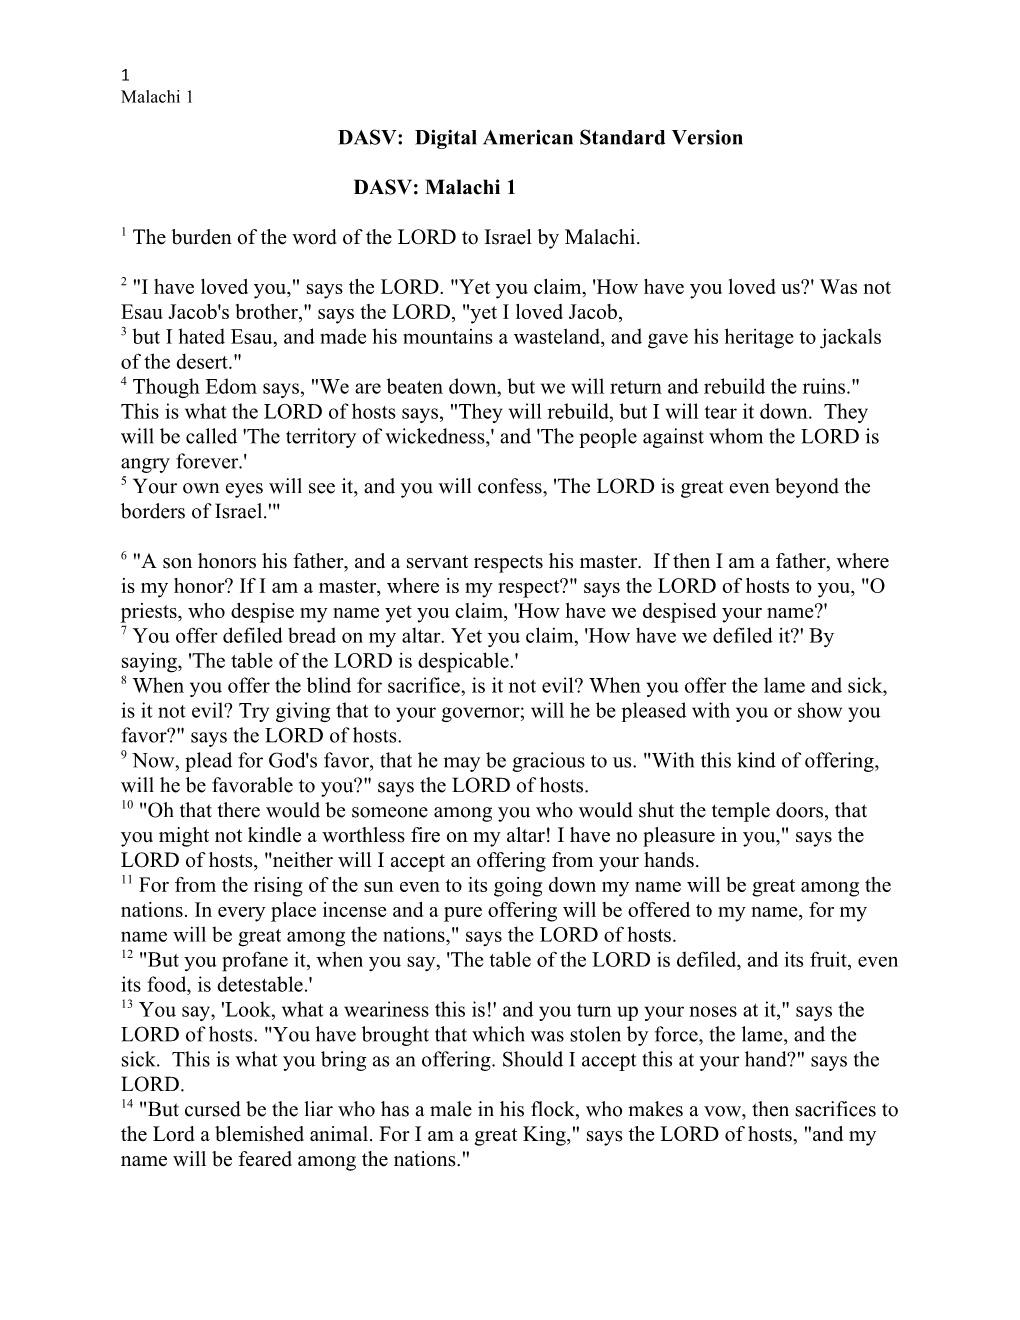 1 the Burden of the Word of the LORD to Israel by Malachi